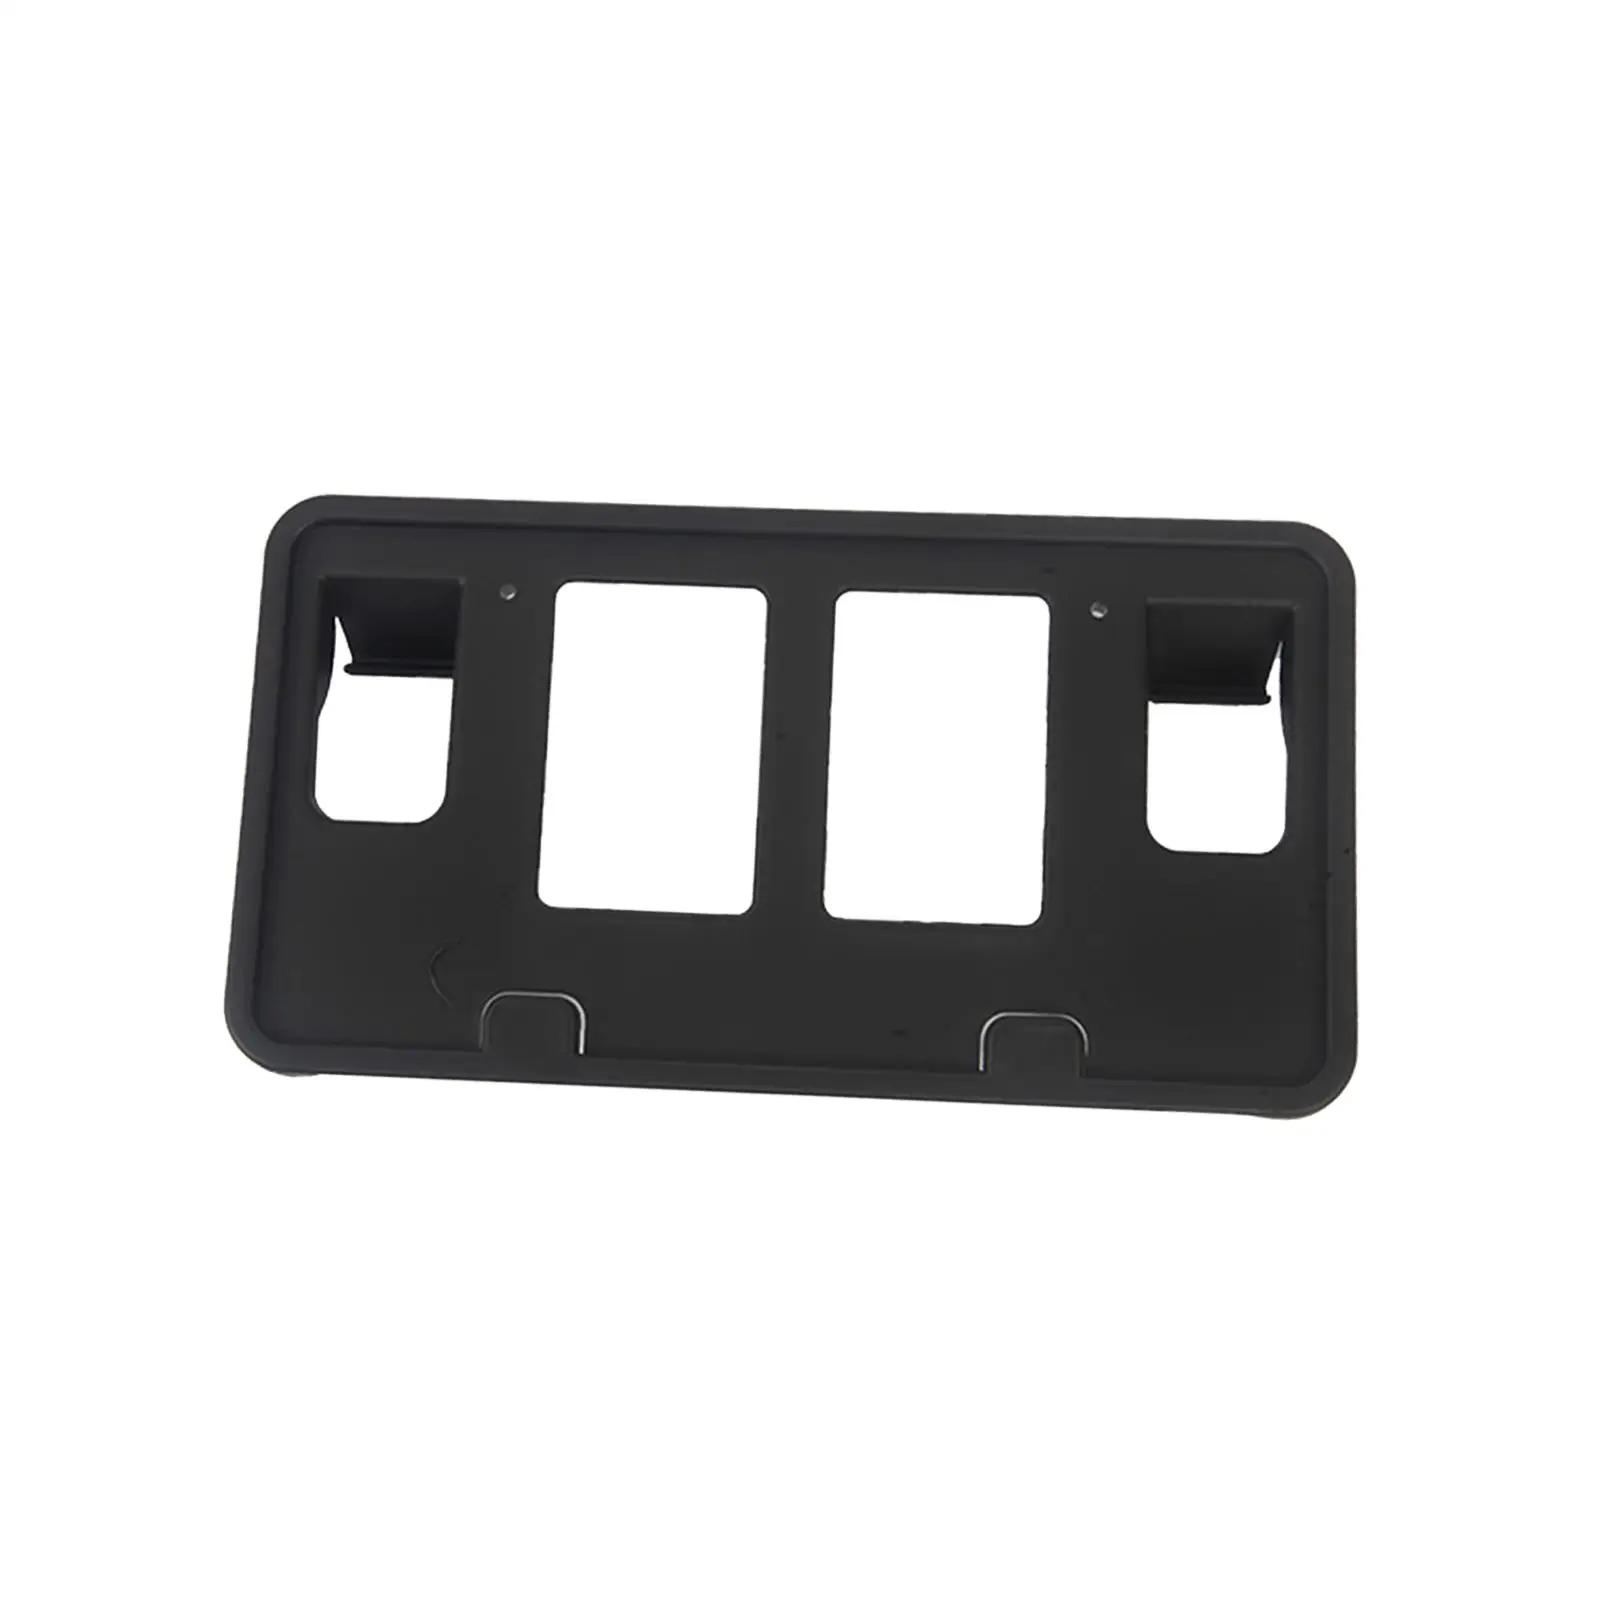 Front License Plate Holder Backing Bracket Black Plastic Fit for Ford F150 06-08 Replacement Durable Easy to Install Auto Parts